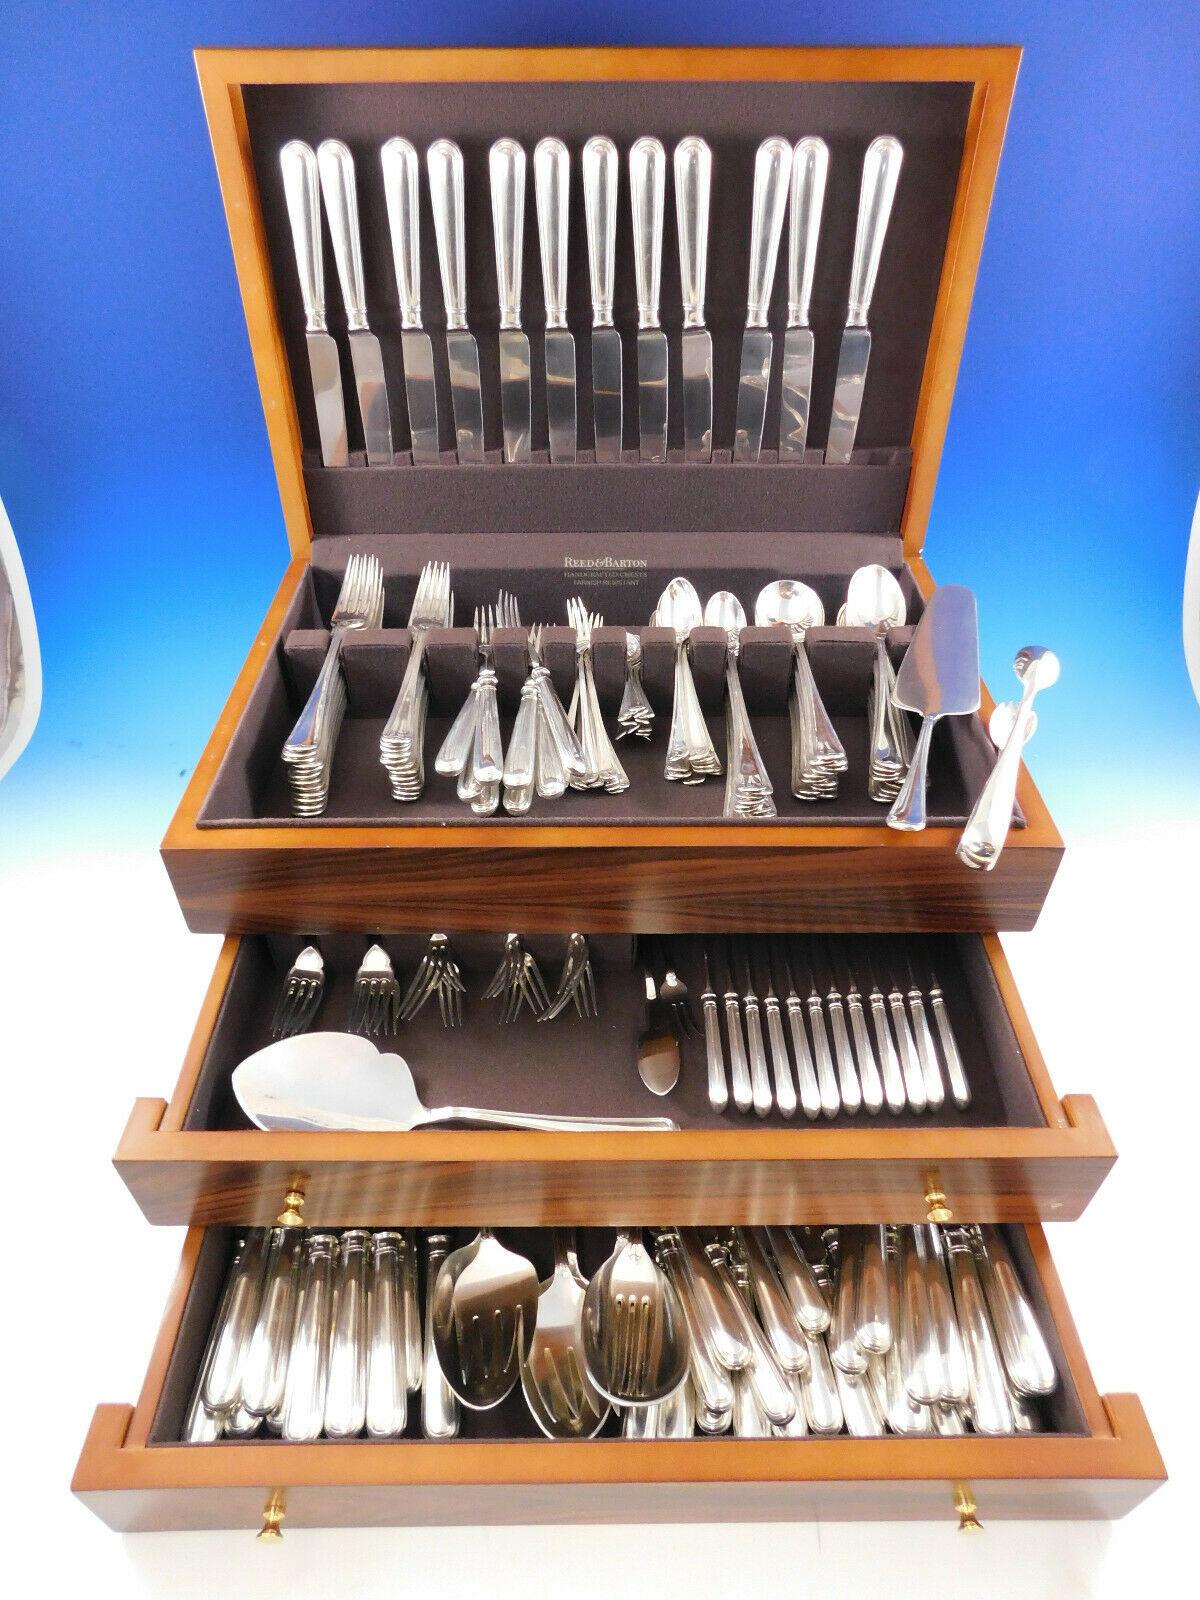 James Robinson

For 70 years, James Robinson has been selling exquisite handmade sterling silver flatware in Sheffield, England. Today, the silver is still made in the traditional way. They start with a rectangular strip of silver, then forge,